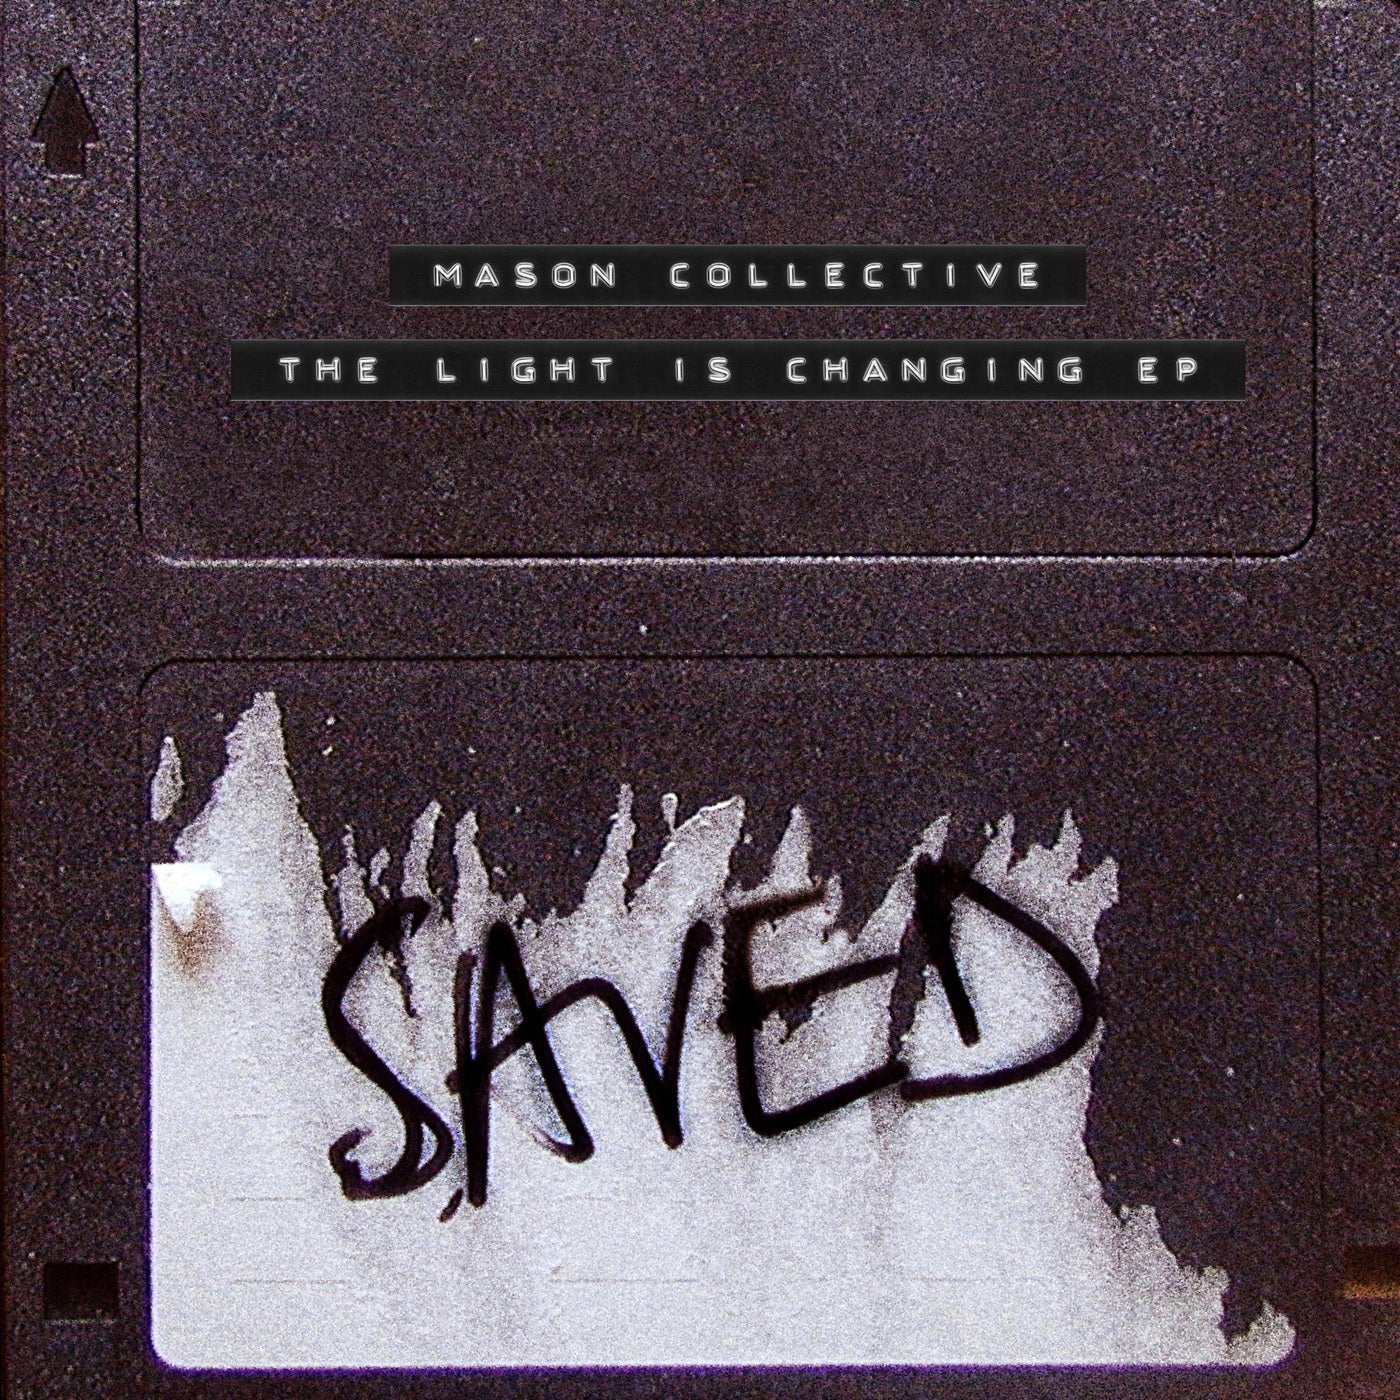 Mason Collective – The Light Is Changing EP [SAVED23901Z]